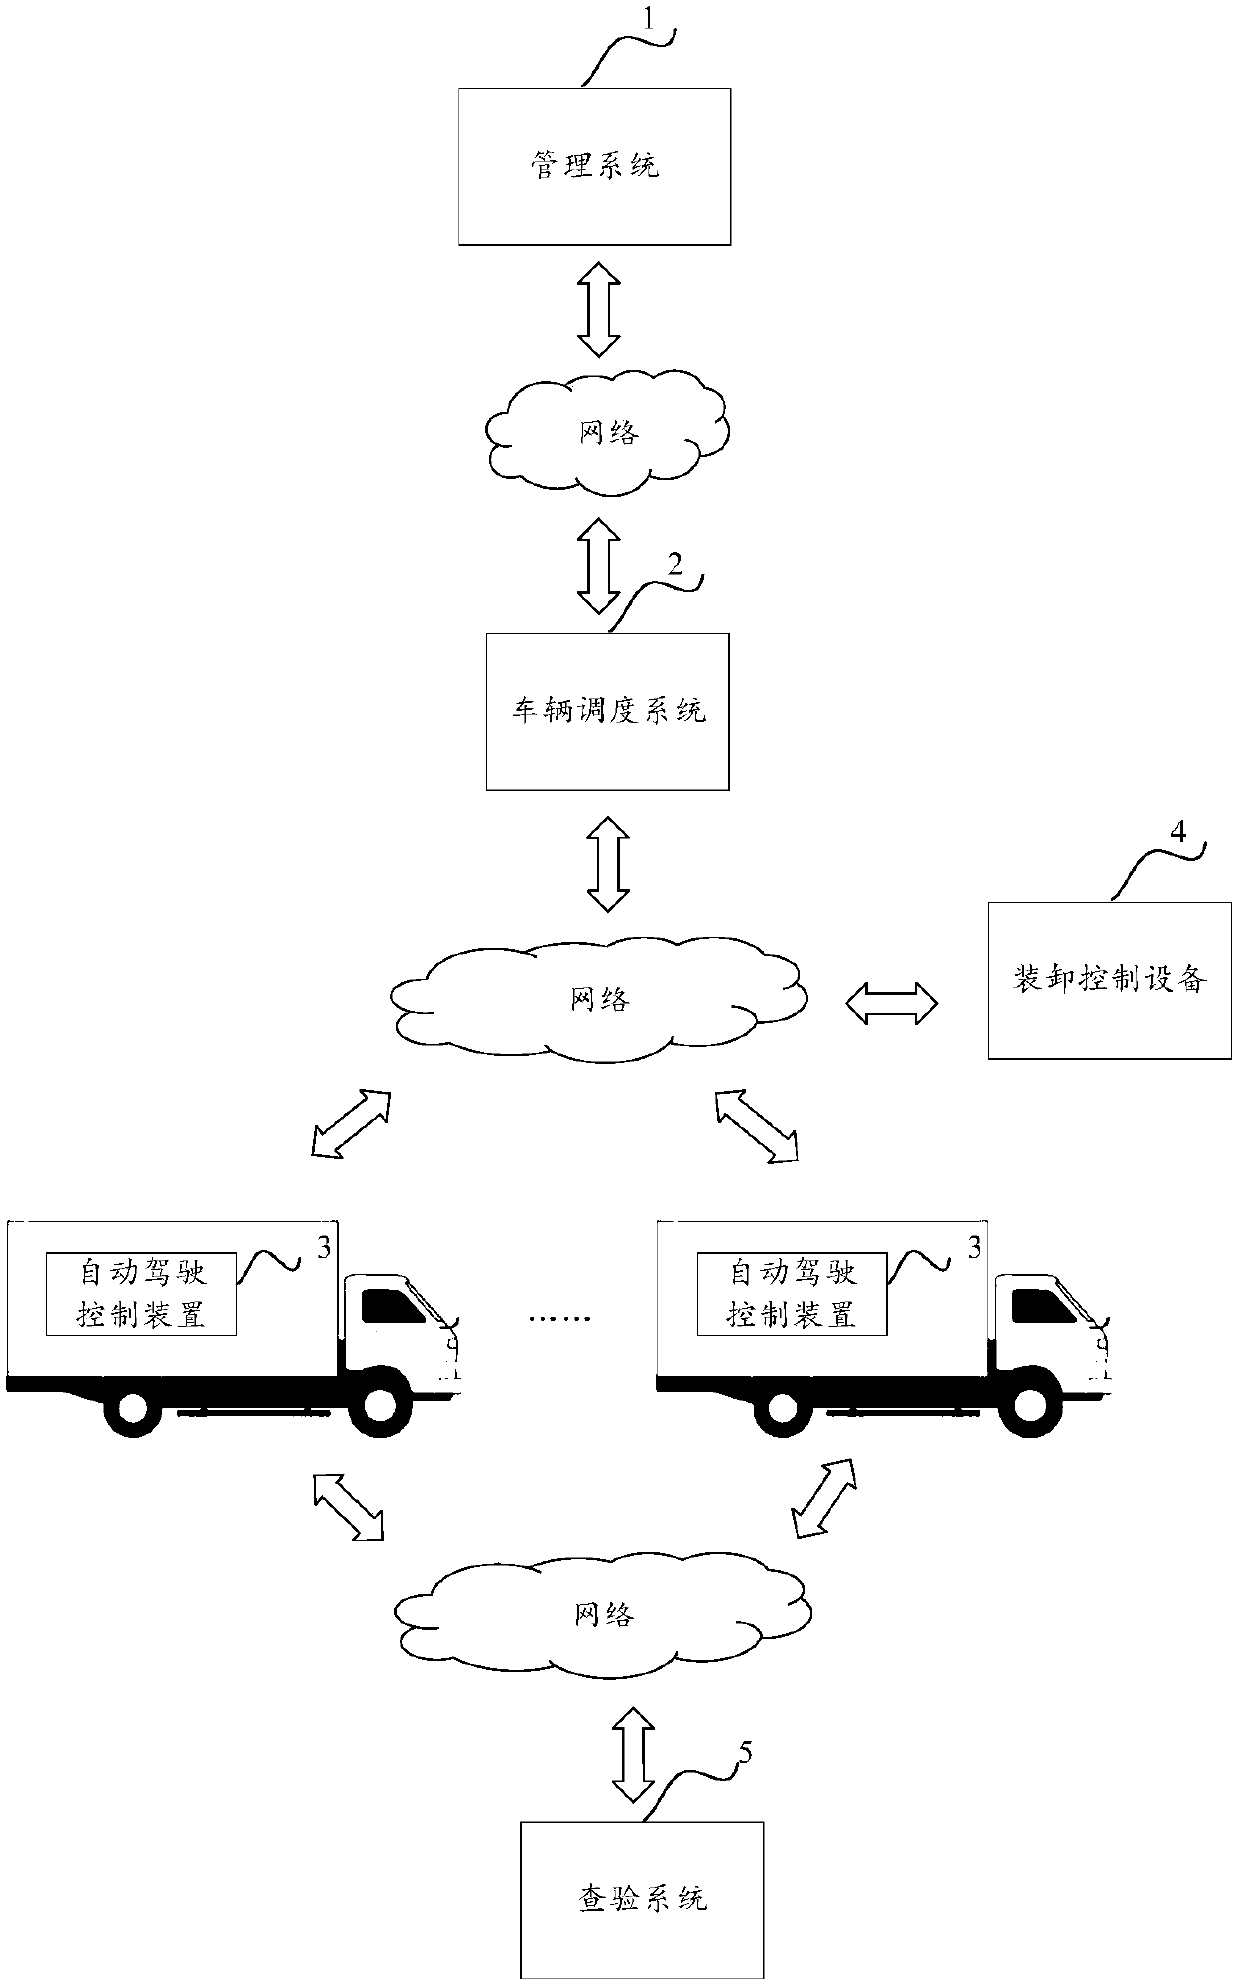 An automatic driving vehicle cross-border transportation system and related equipment